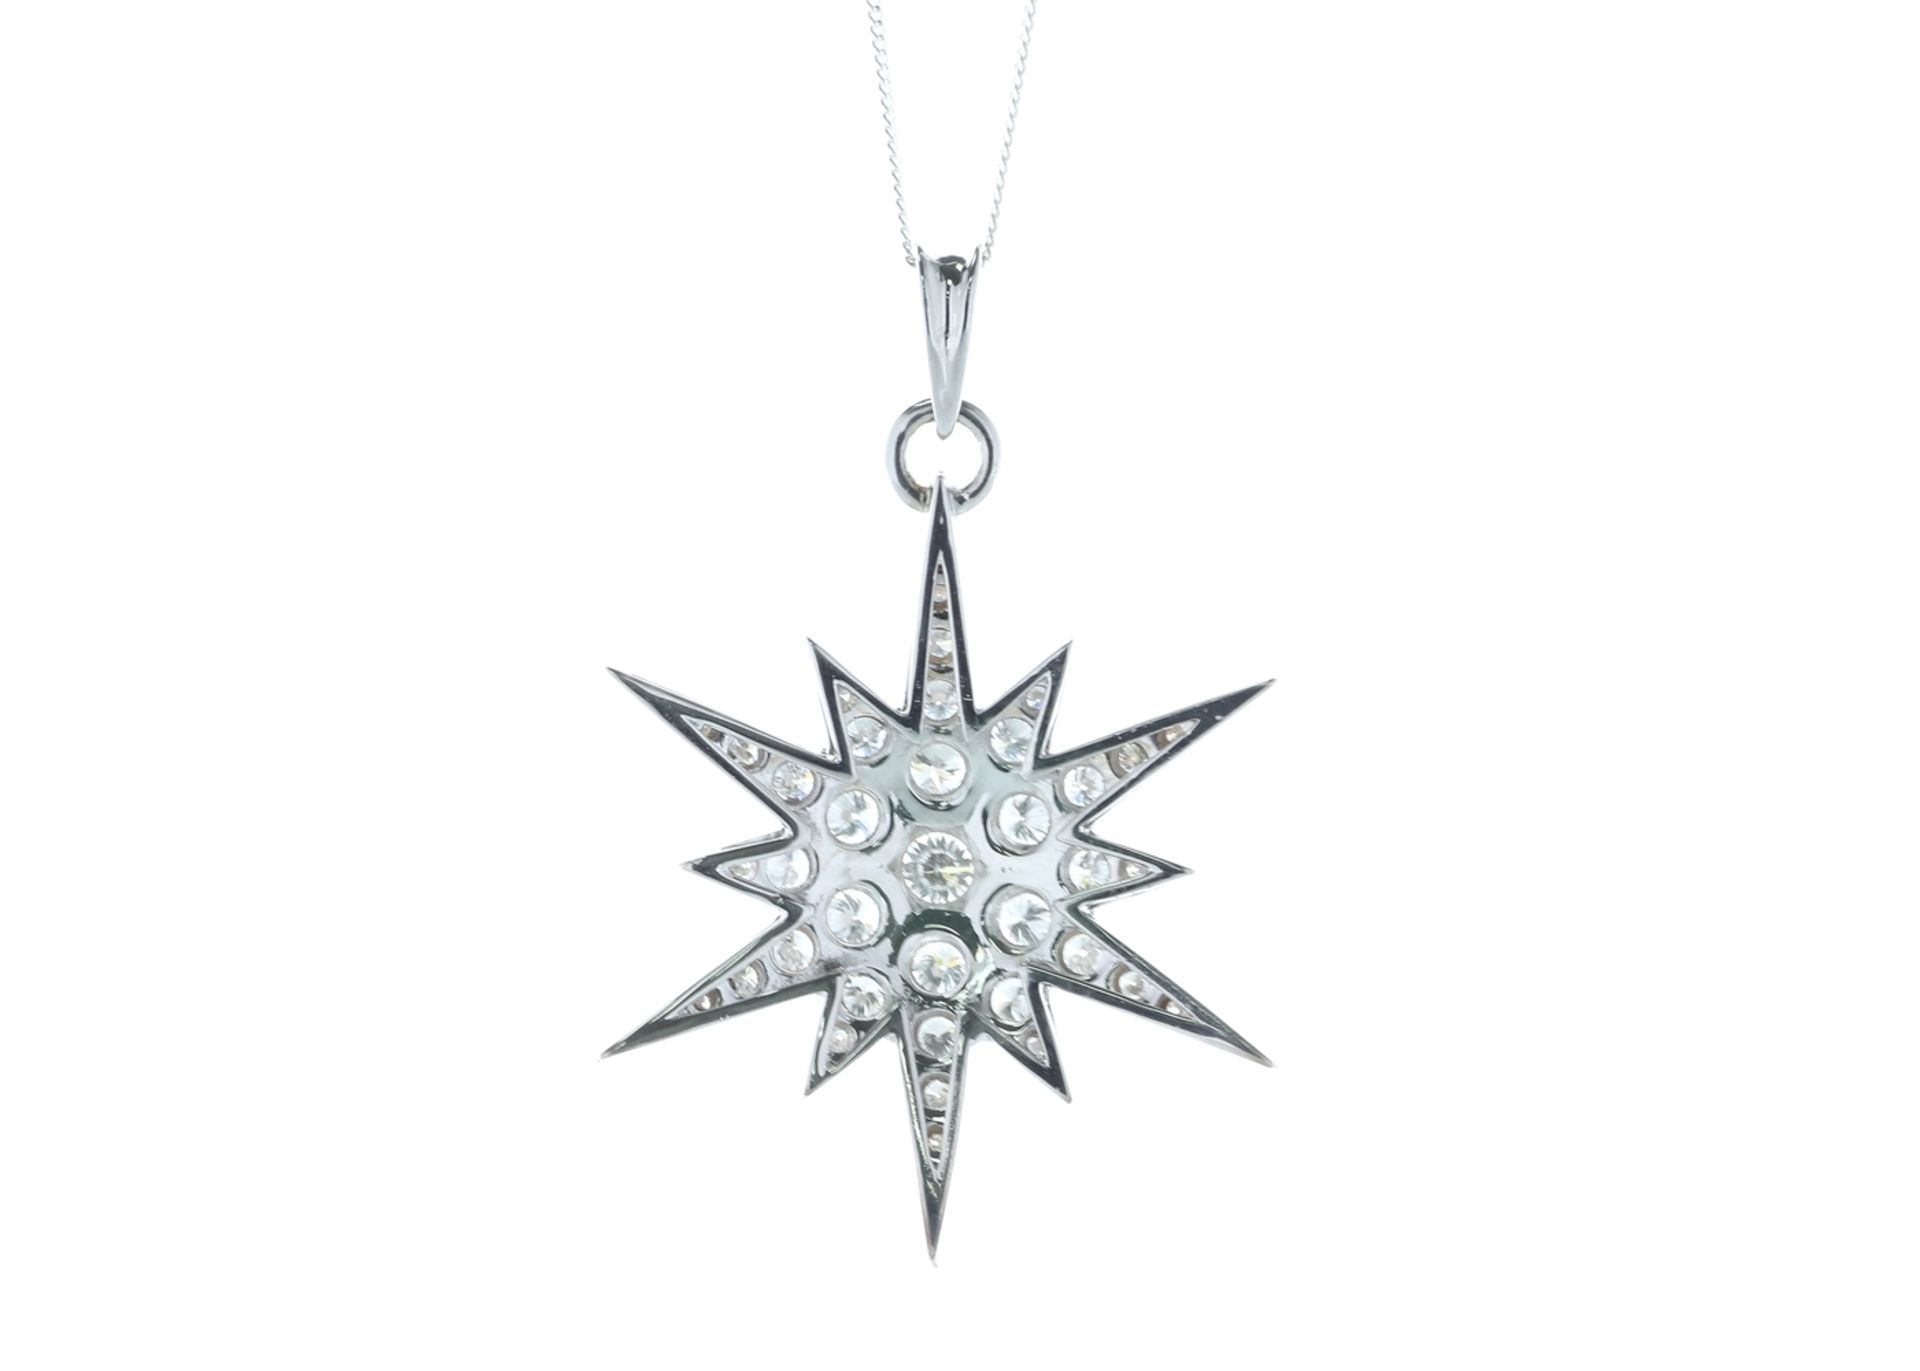 18ct White Gold Star Shape Diamond Pendant 2.84 Carats - Valued by IDI £19,500.00 - 18ct White - Image 3 of 4